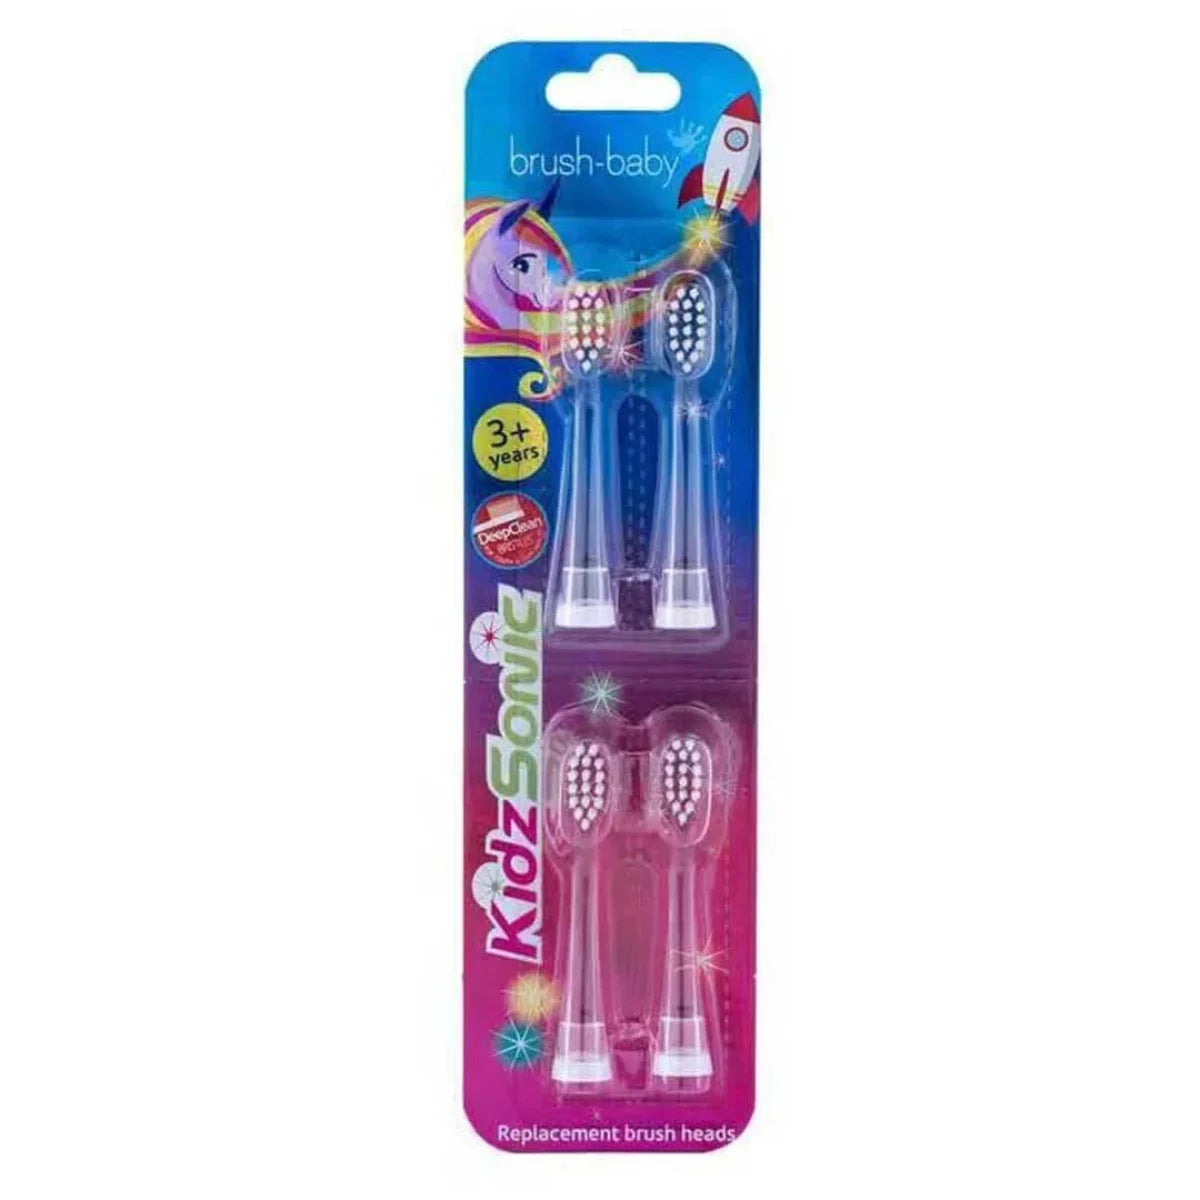 4 replacement brush heads for the kids sonic rocket and unicorn kids electric toothbrushes